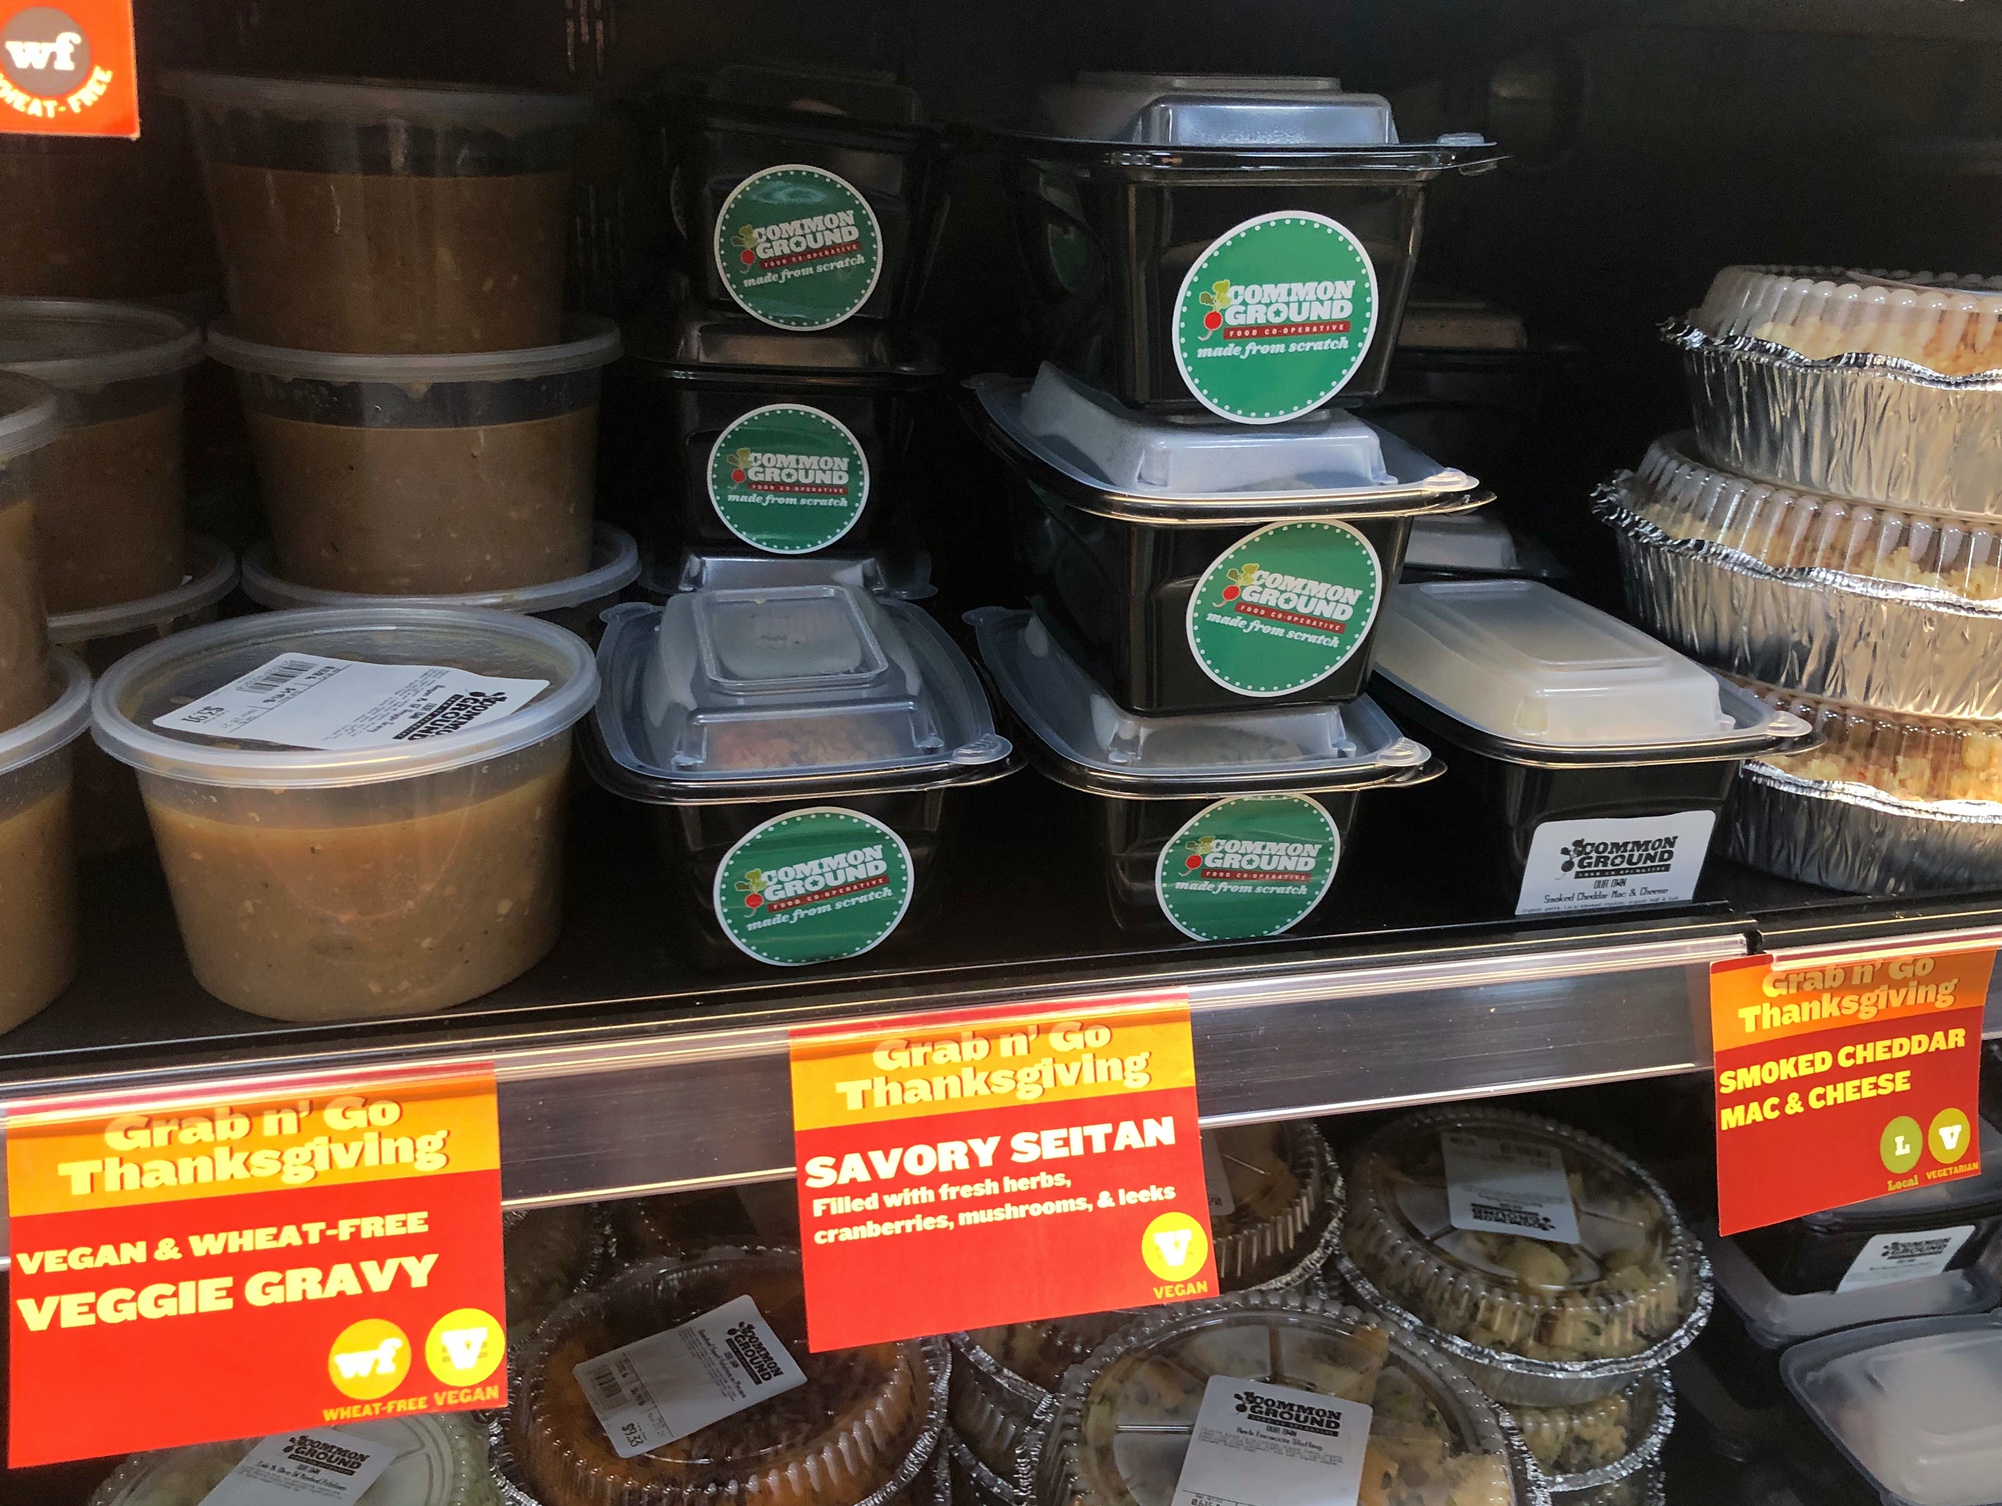 Vegan and wheatfree options are available in the grab-and-go section at Common Ground. There are little orange signs with the names of the dishes. Photo by Alyssa Buckley.